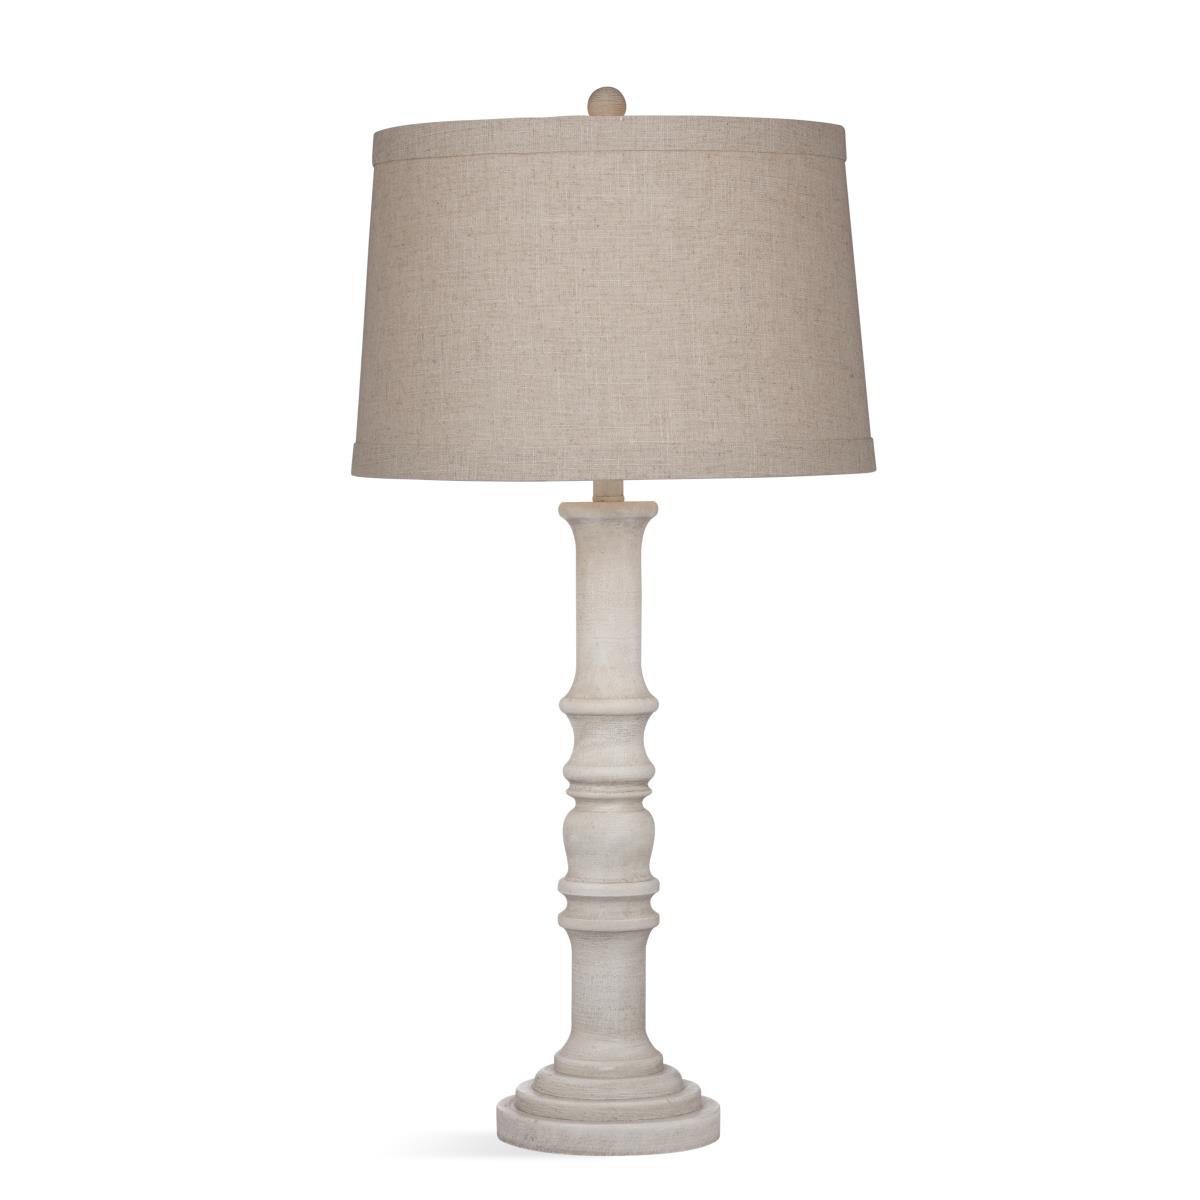 L3519t Augusta Table Lamp, White Wash - 17 X 17 X 34 In.